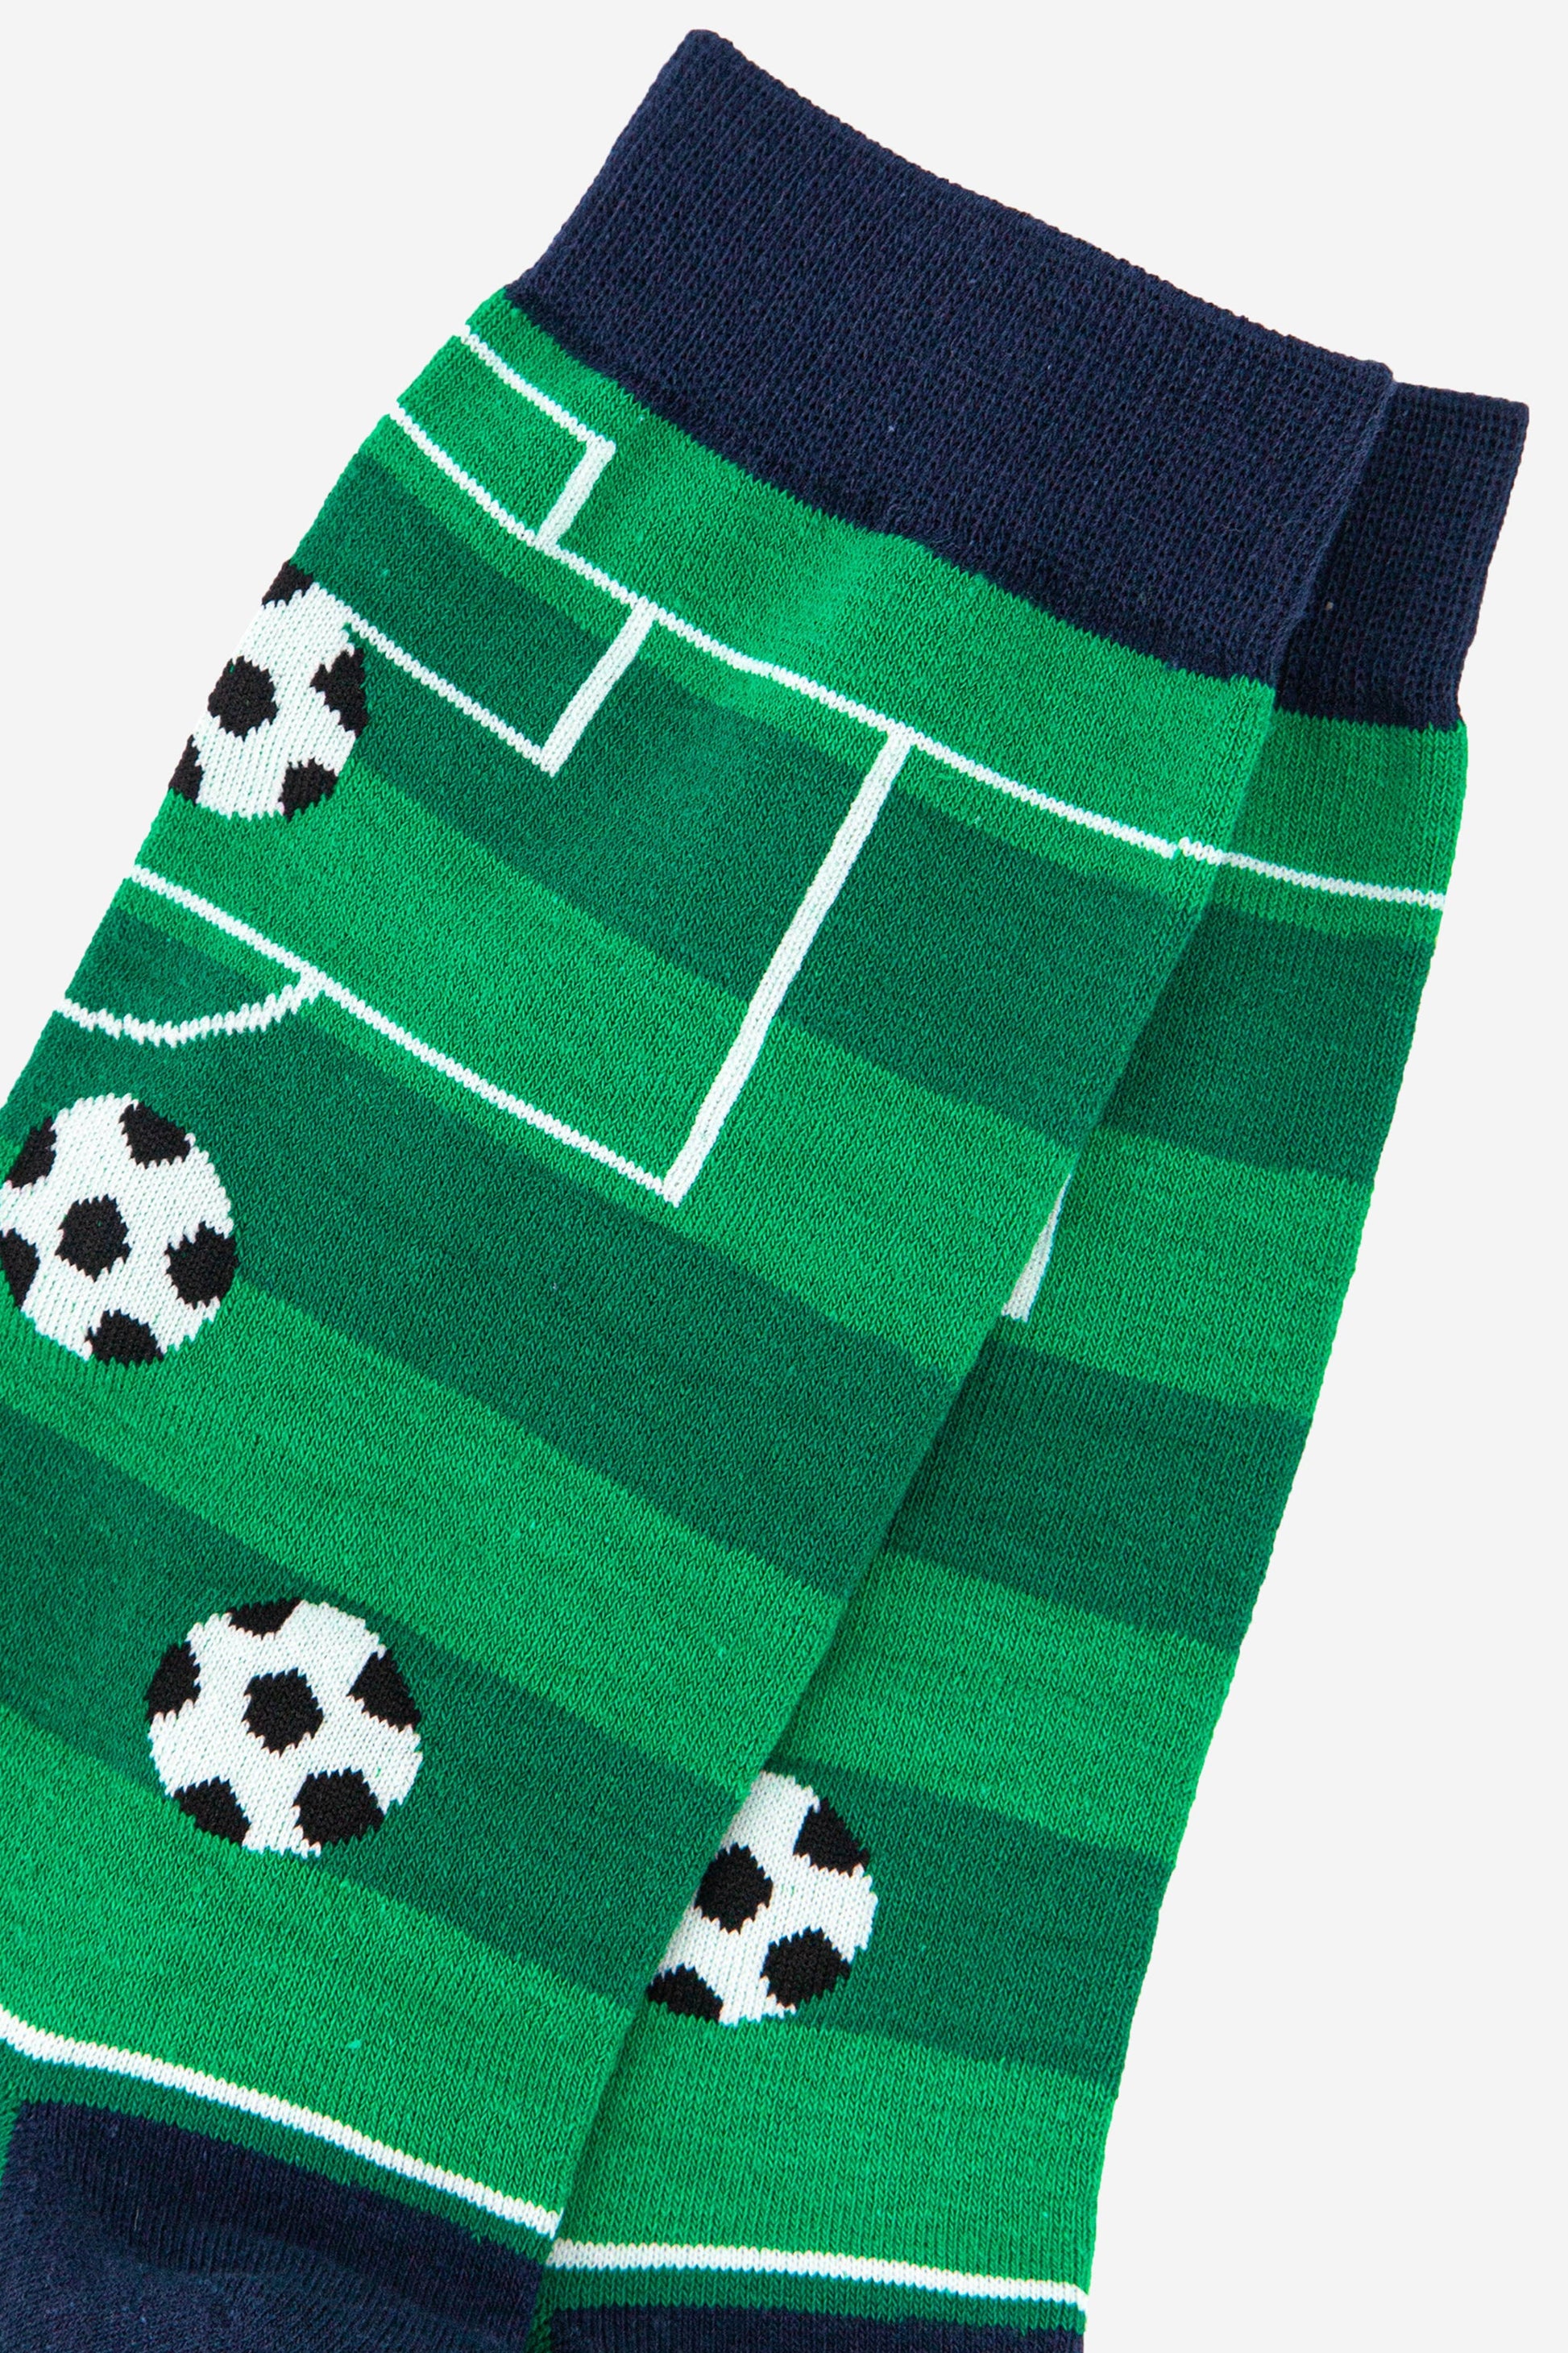 close up of the football field design on the mens dress socks